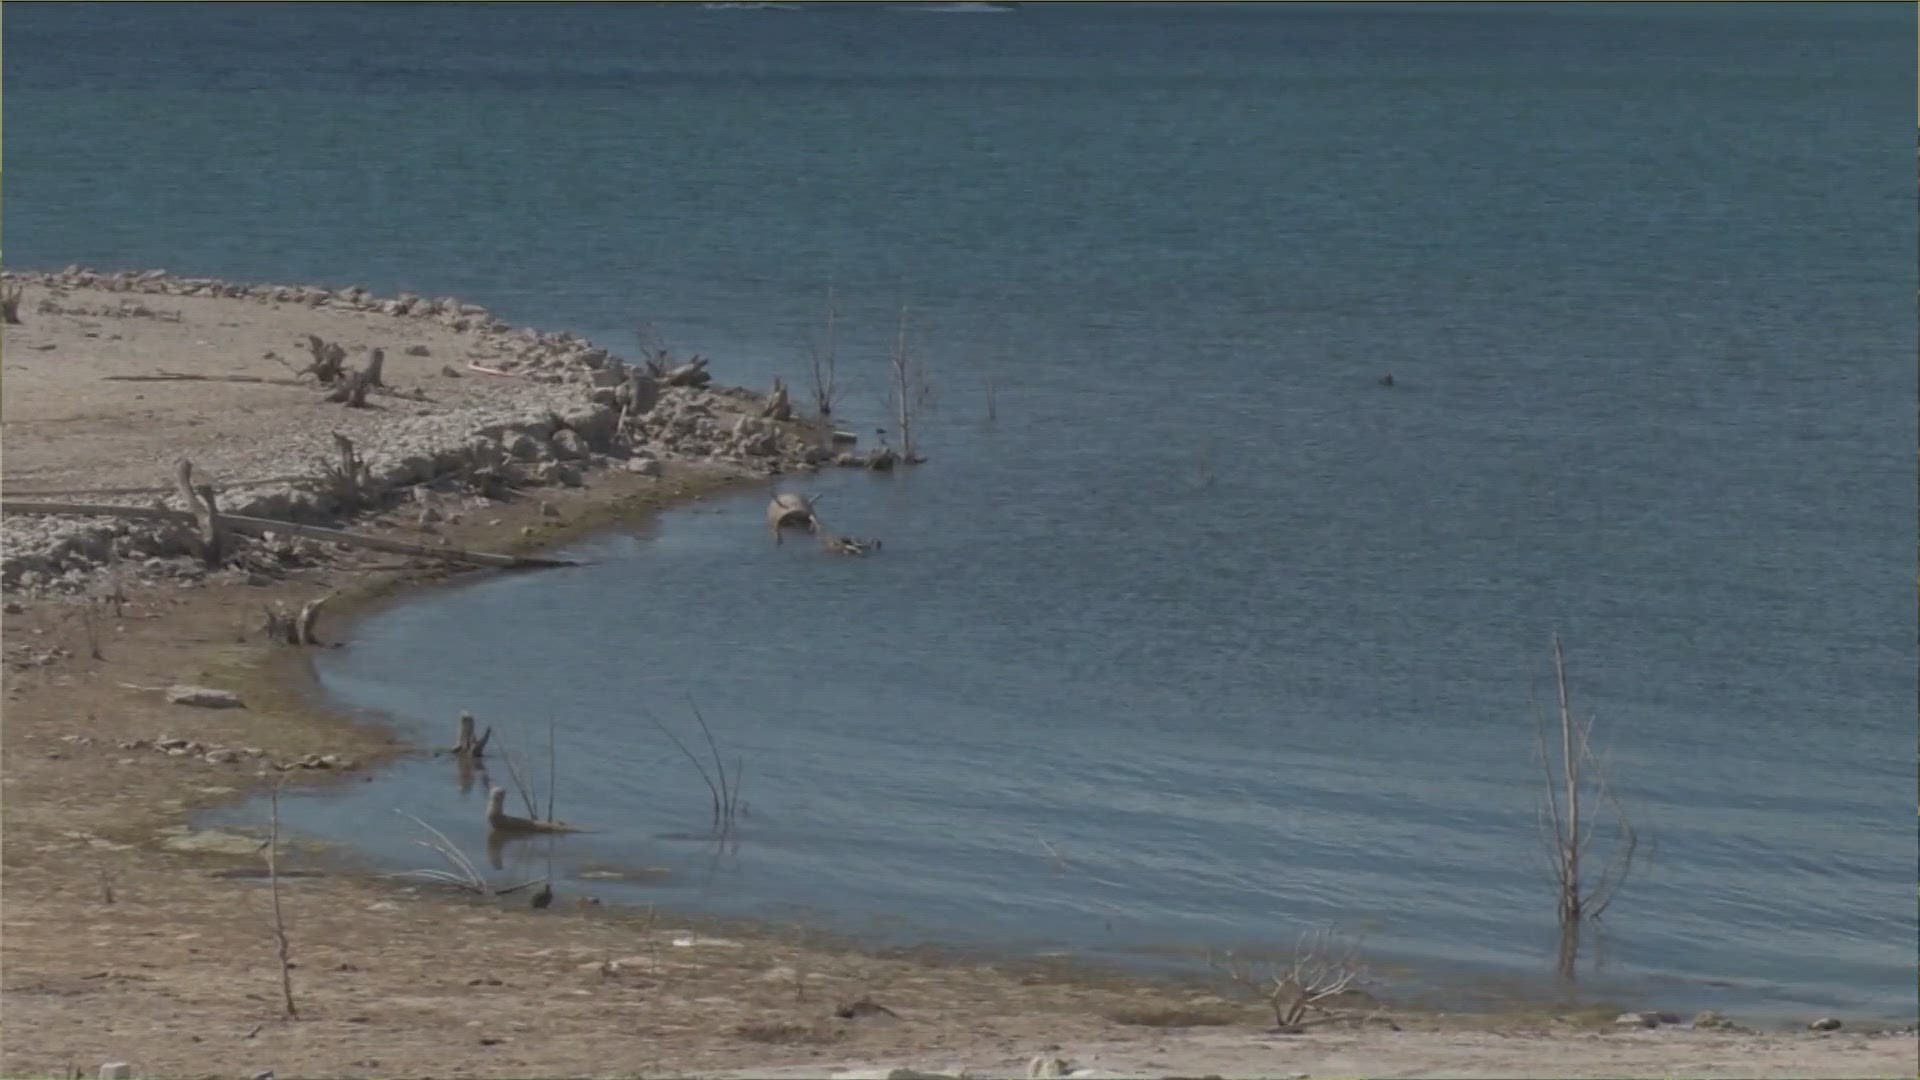 The Lower Colorado River Authority is reminding lake visitors to stay safe amid the ongoing drought conditions.